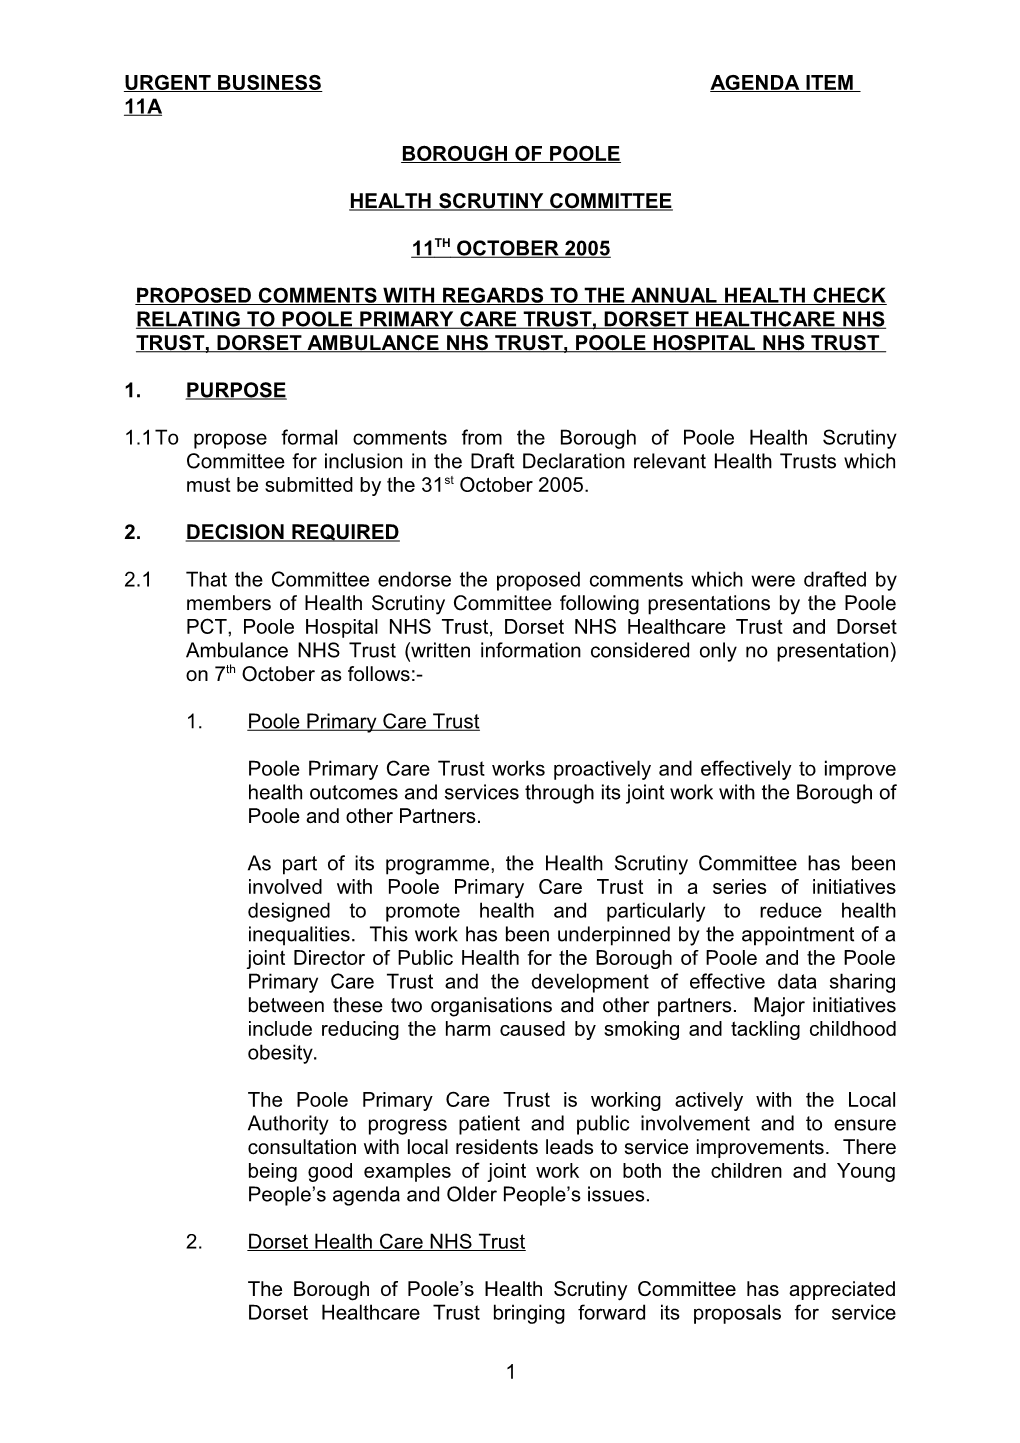 Proposed Comments with Regards to the Annual Health Check Relating to Poole Primary Care